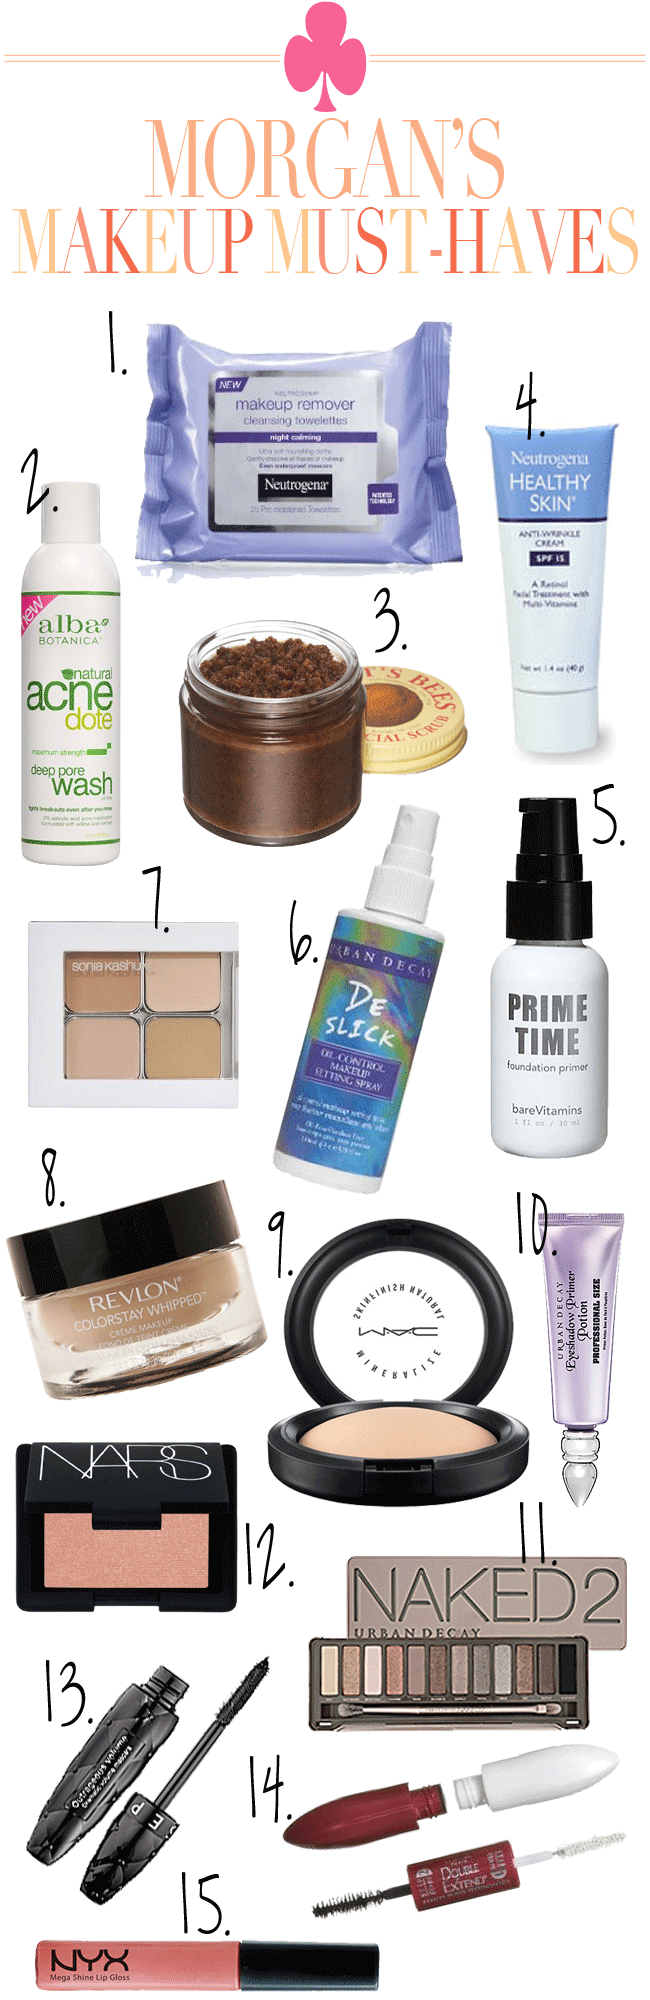 makeup must-haves